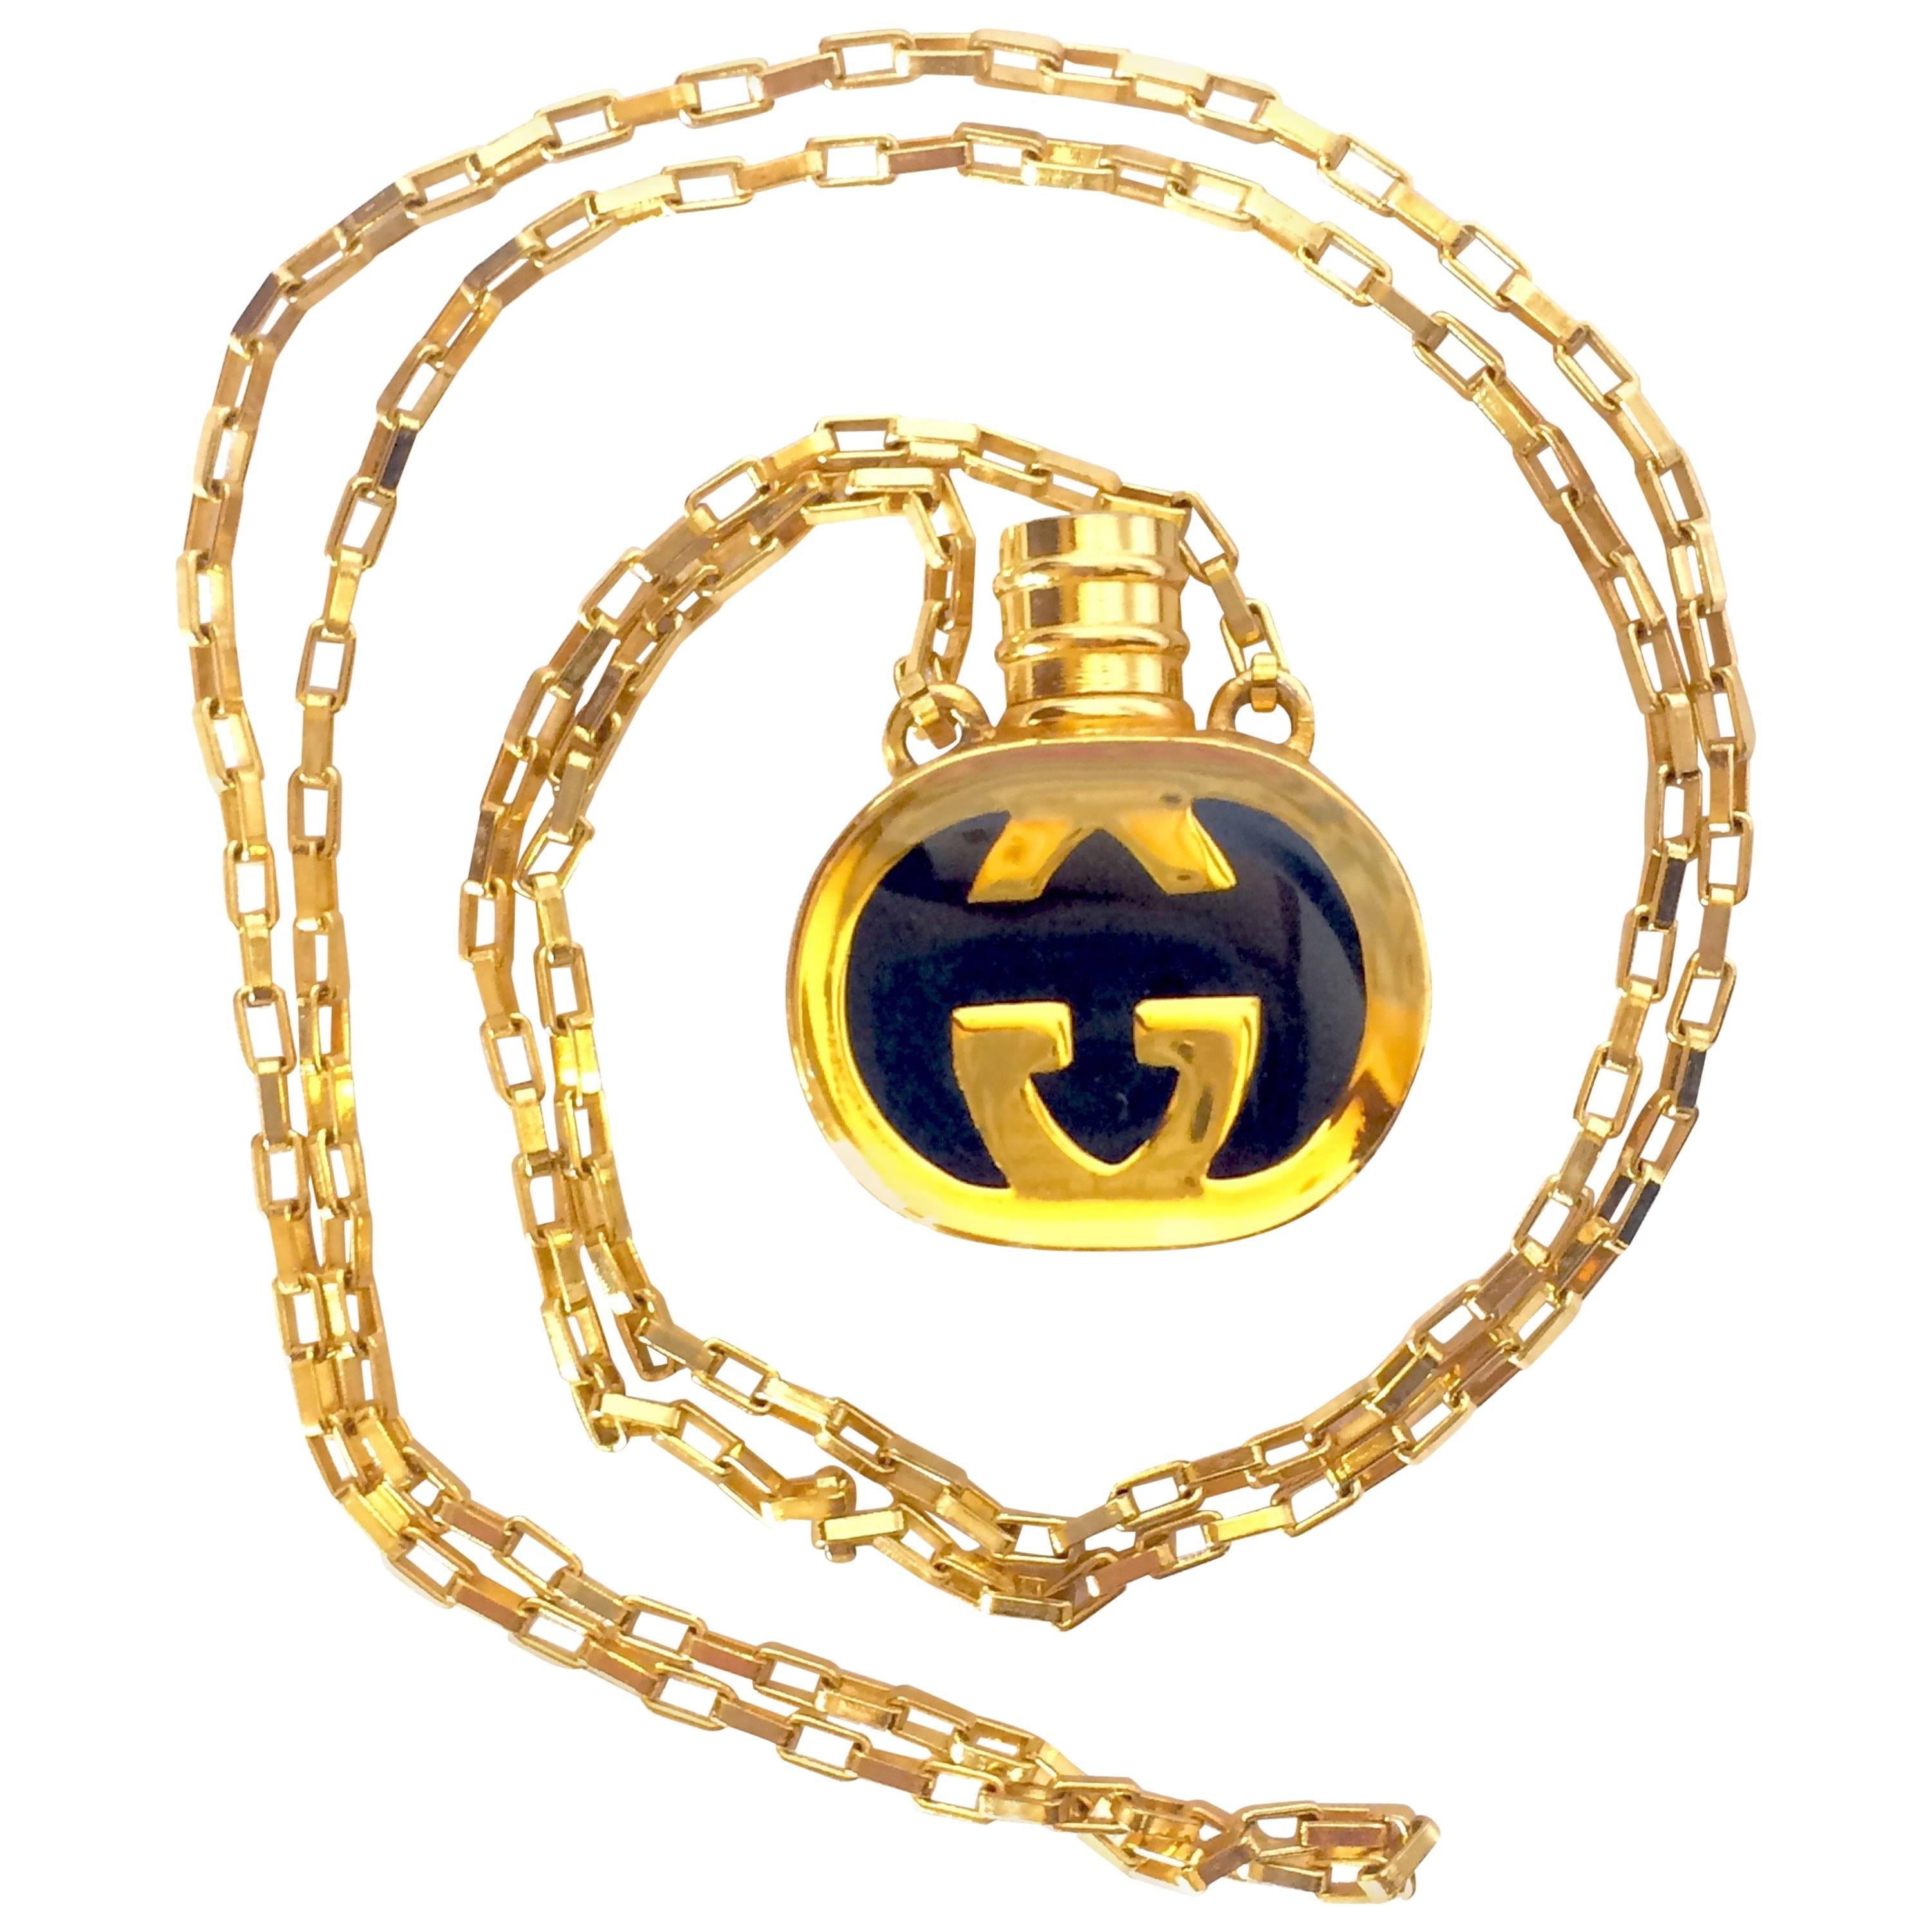 Vintage Gucci gold and navy round shape perfume bottle necklace with logo mark.